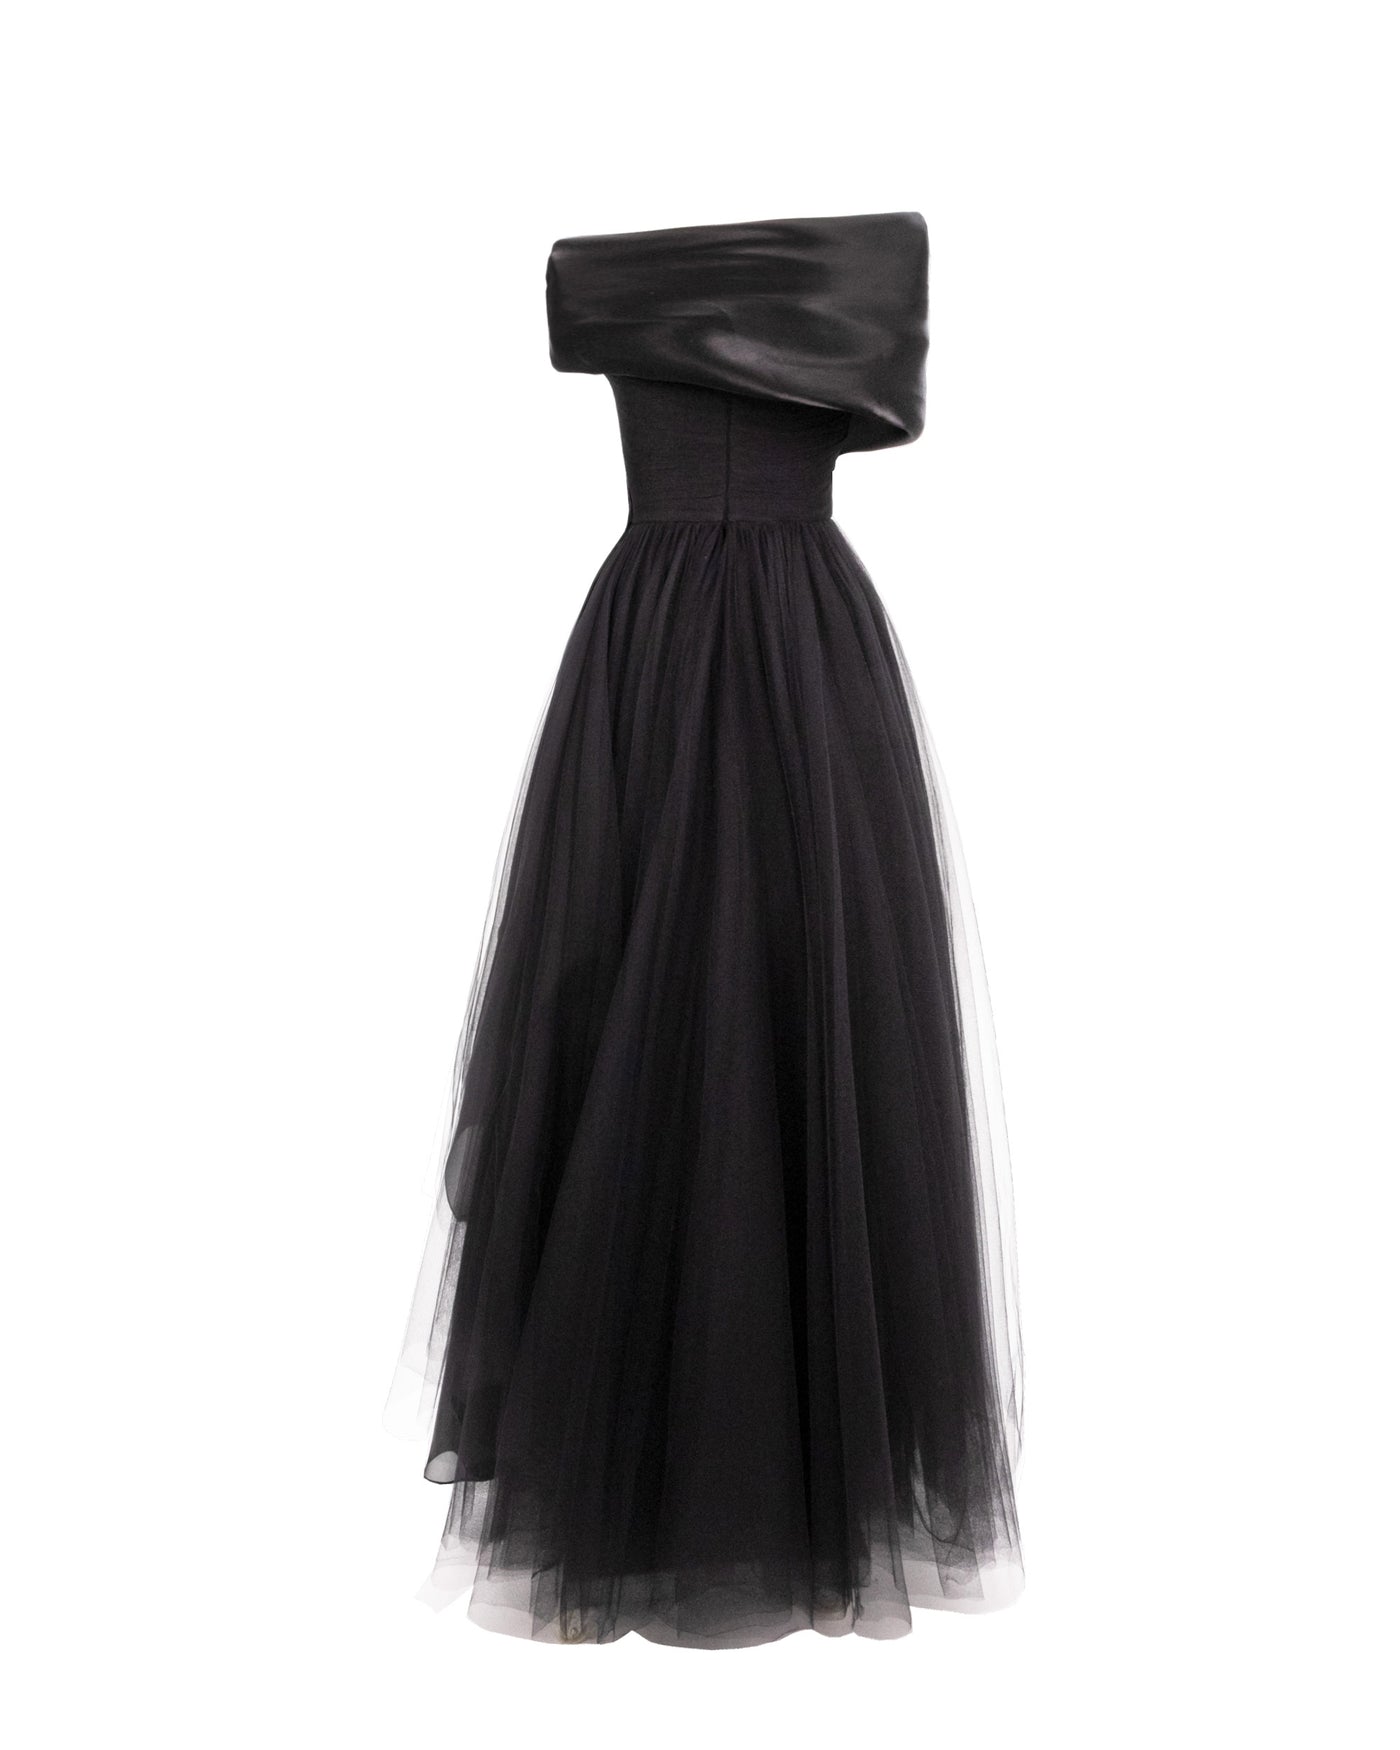 Draped and Ruffled Tulle Dress